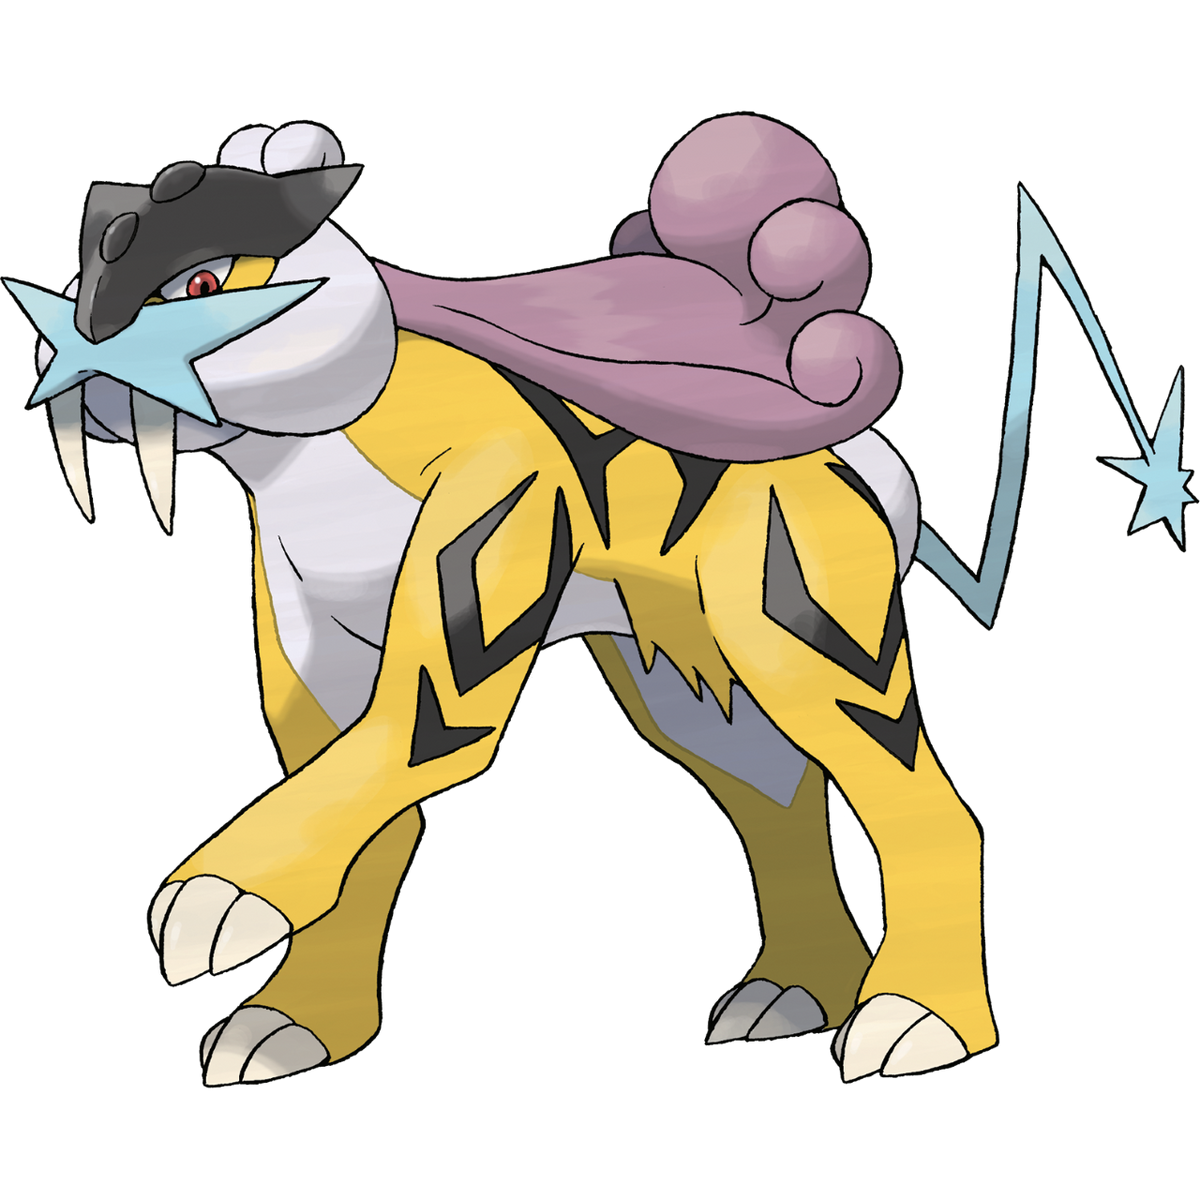 Raikou's paradox form is… something, what fo you think about the new P, Pokémon